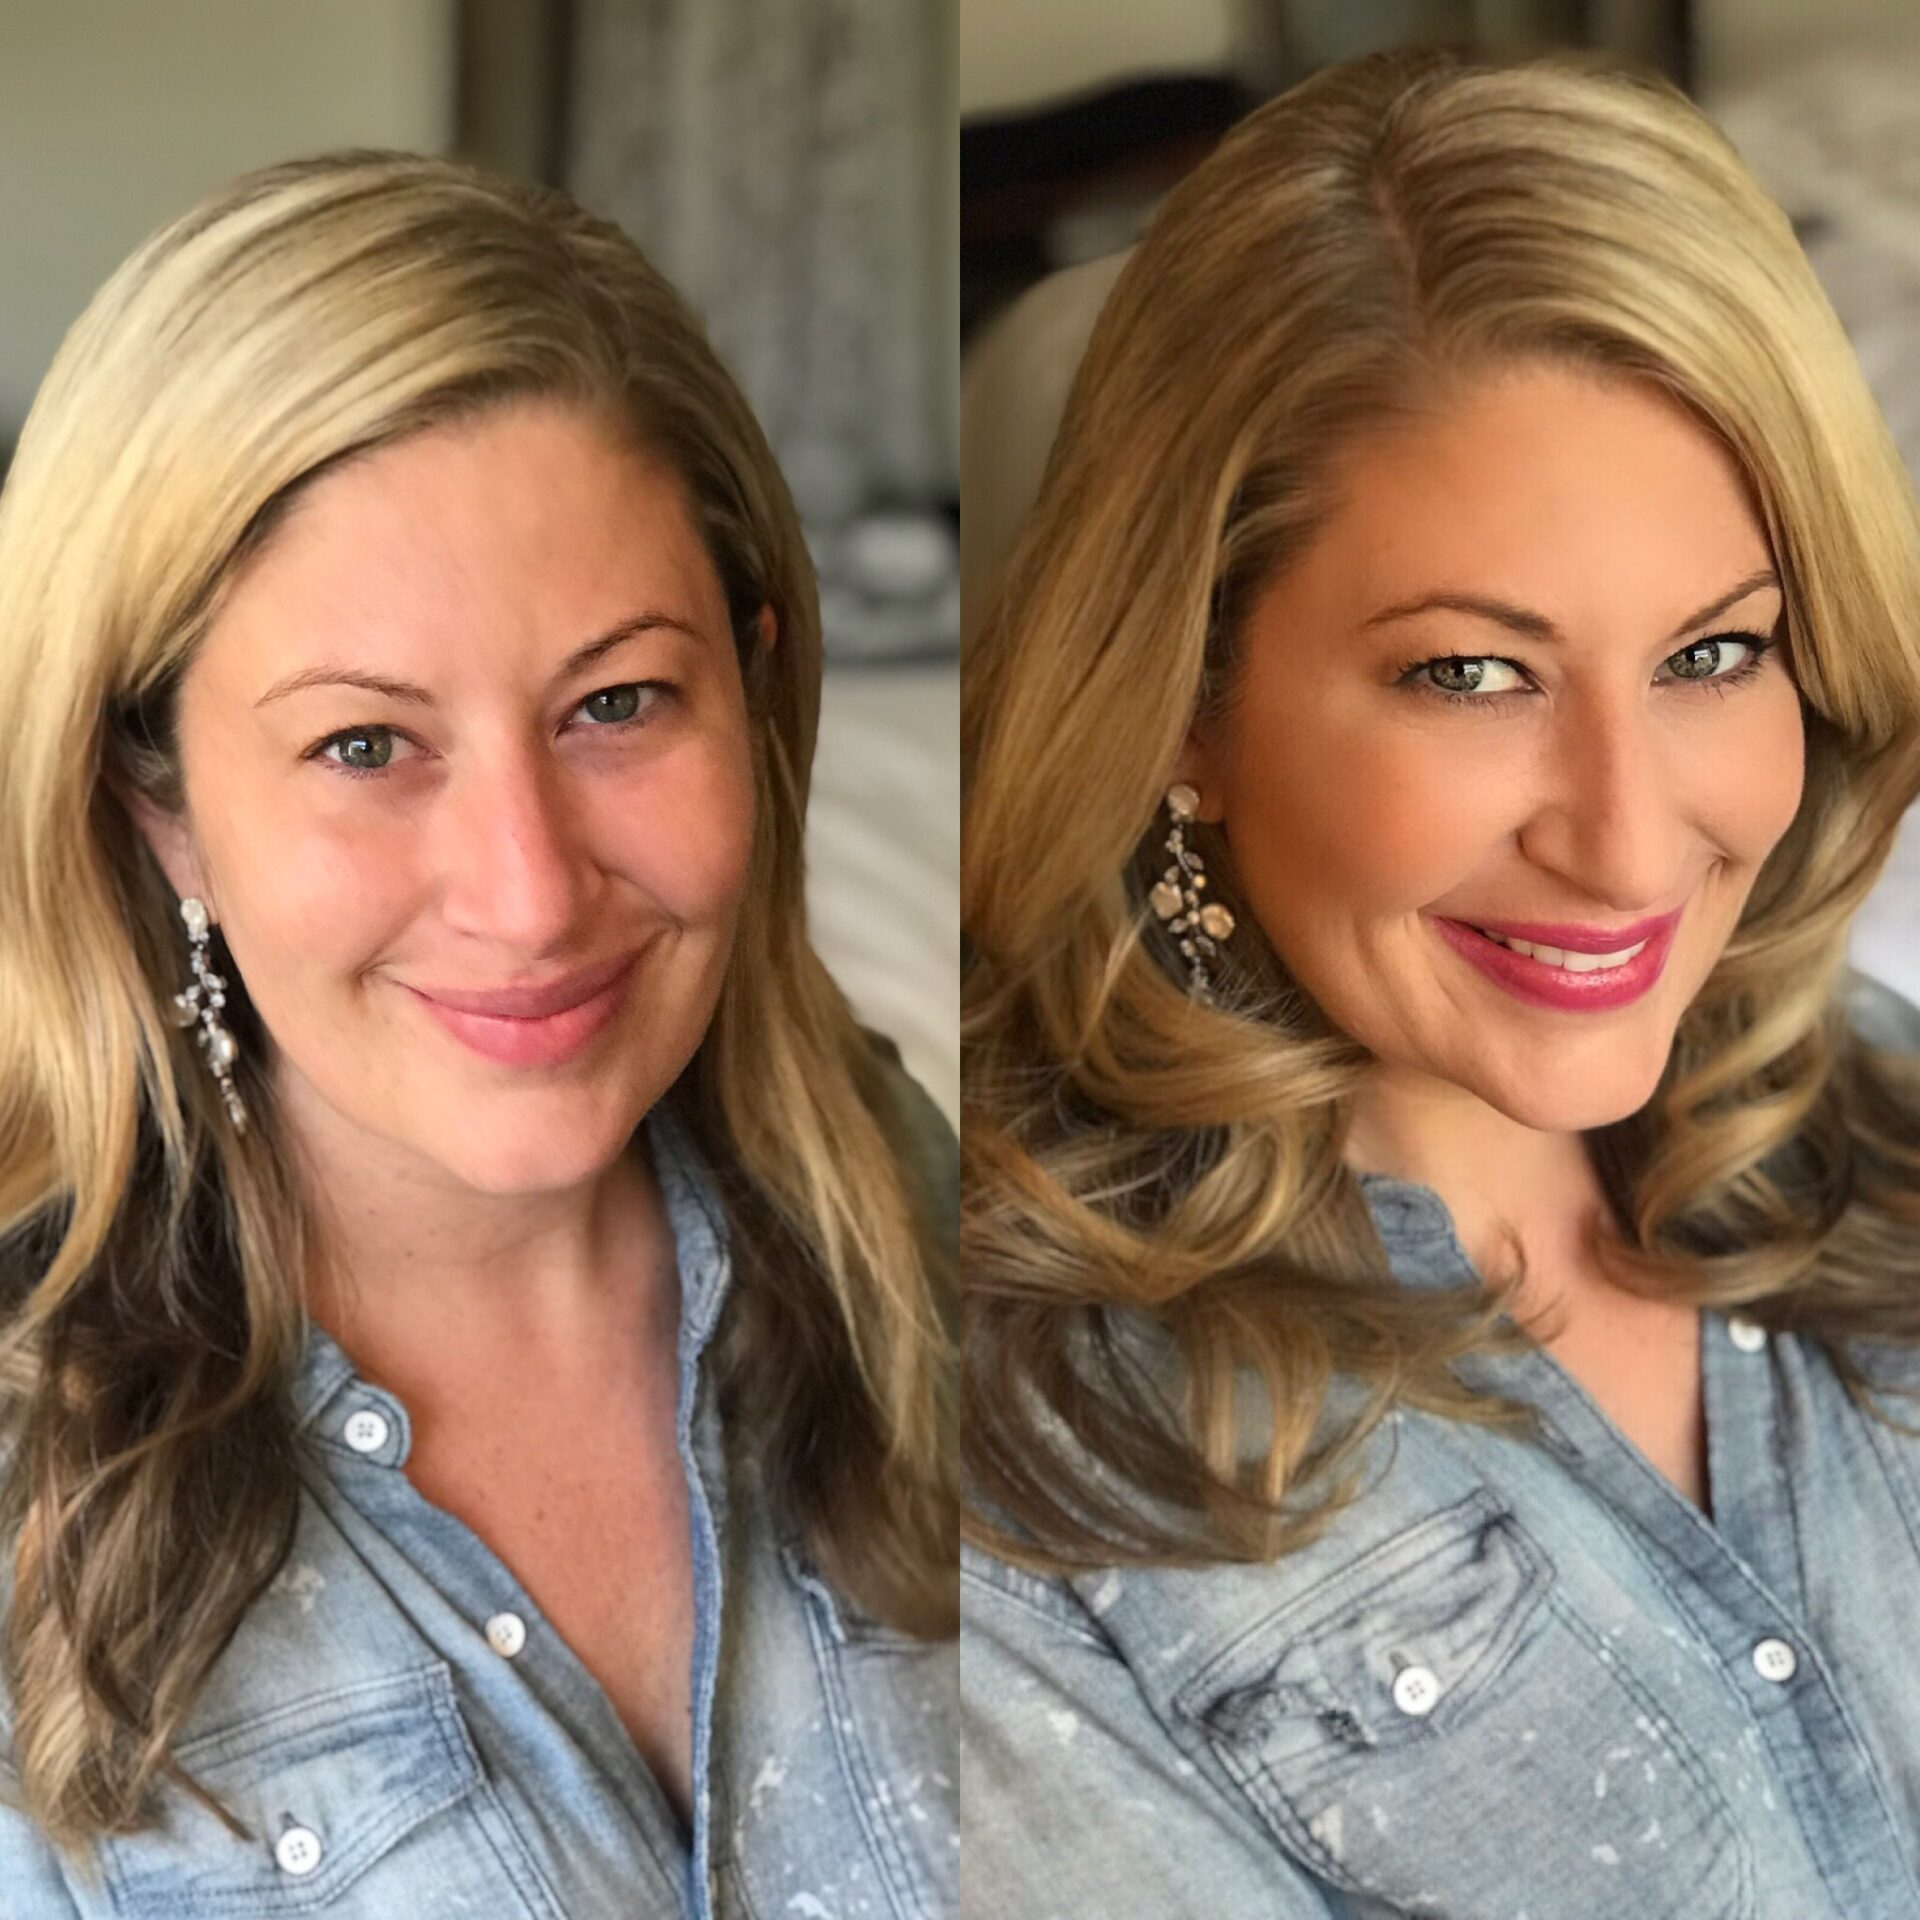 A before and after makeup look of a person wearing a denim blouse